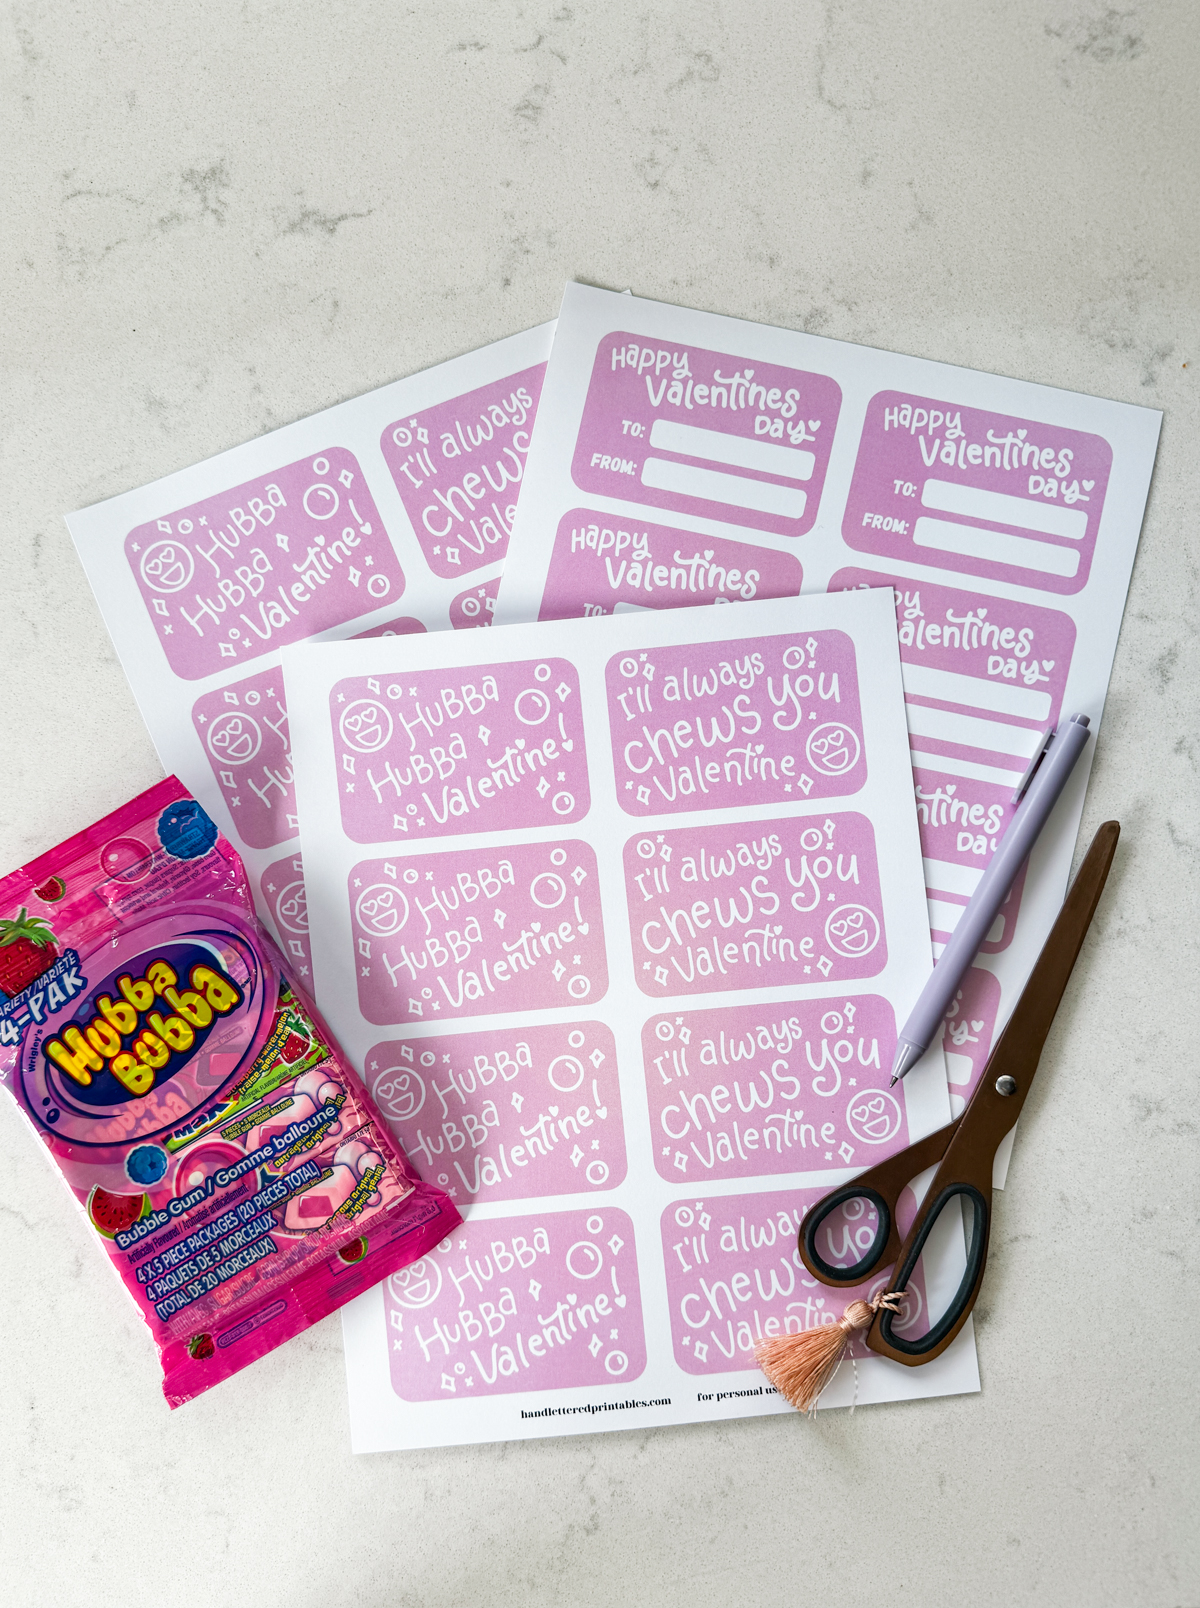 image of printed valentines cards (showing front and back) with a bubble gum theme, styled on marble countertop with scissors, pen and hubba bubba gum. valentines read 'hubba hubba valentine!' and 'I'll always chews you, valentine'